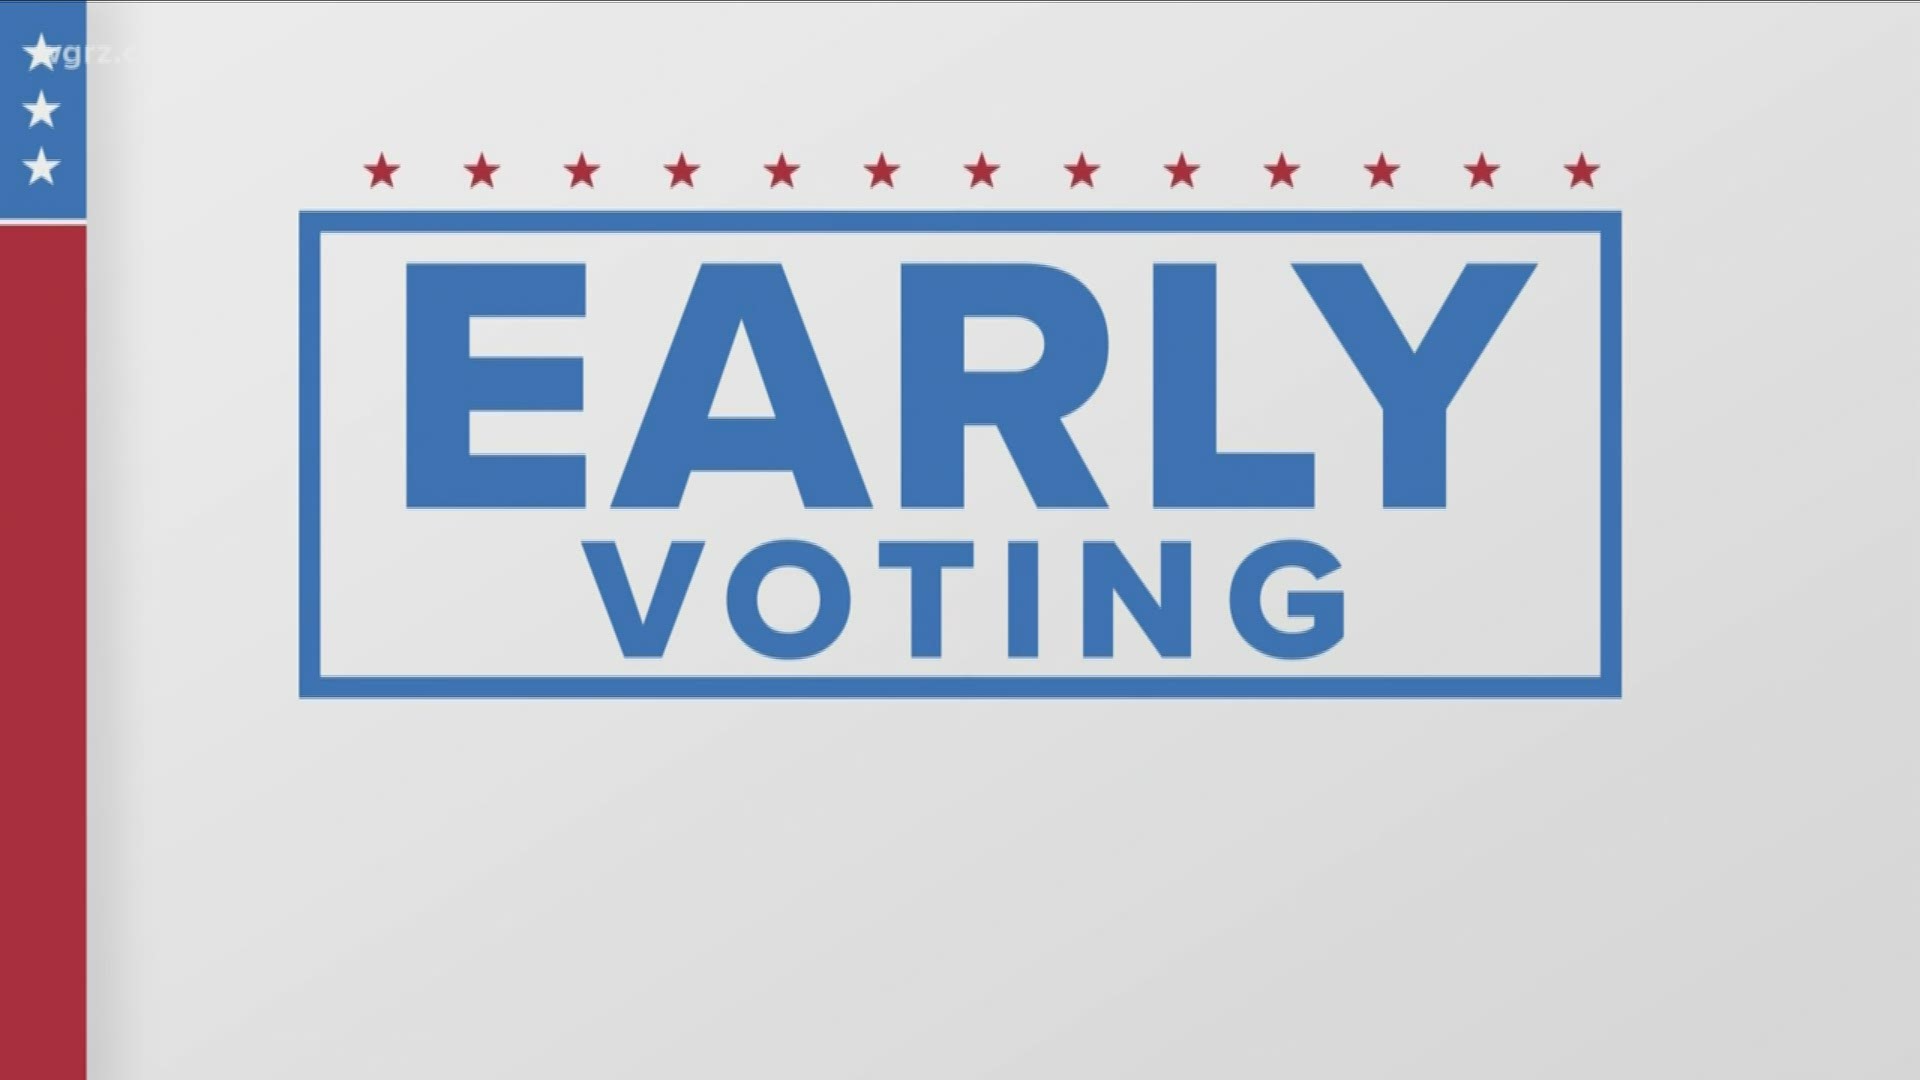 The state's first-ever early voting period is up with more than a quarter-million votes cast across the state.